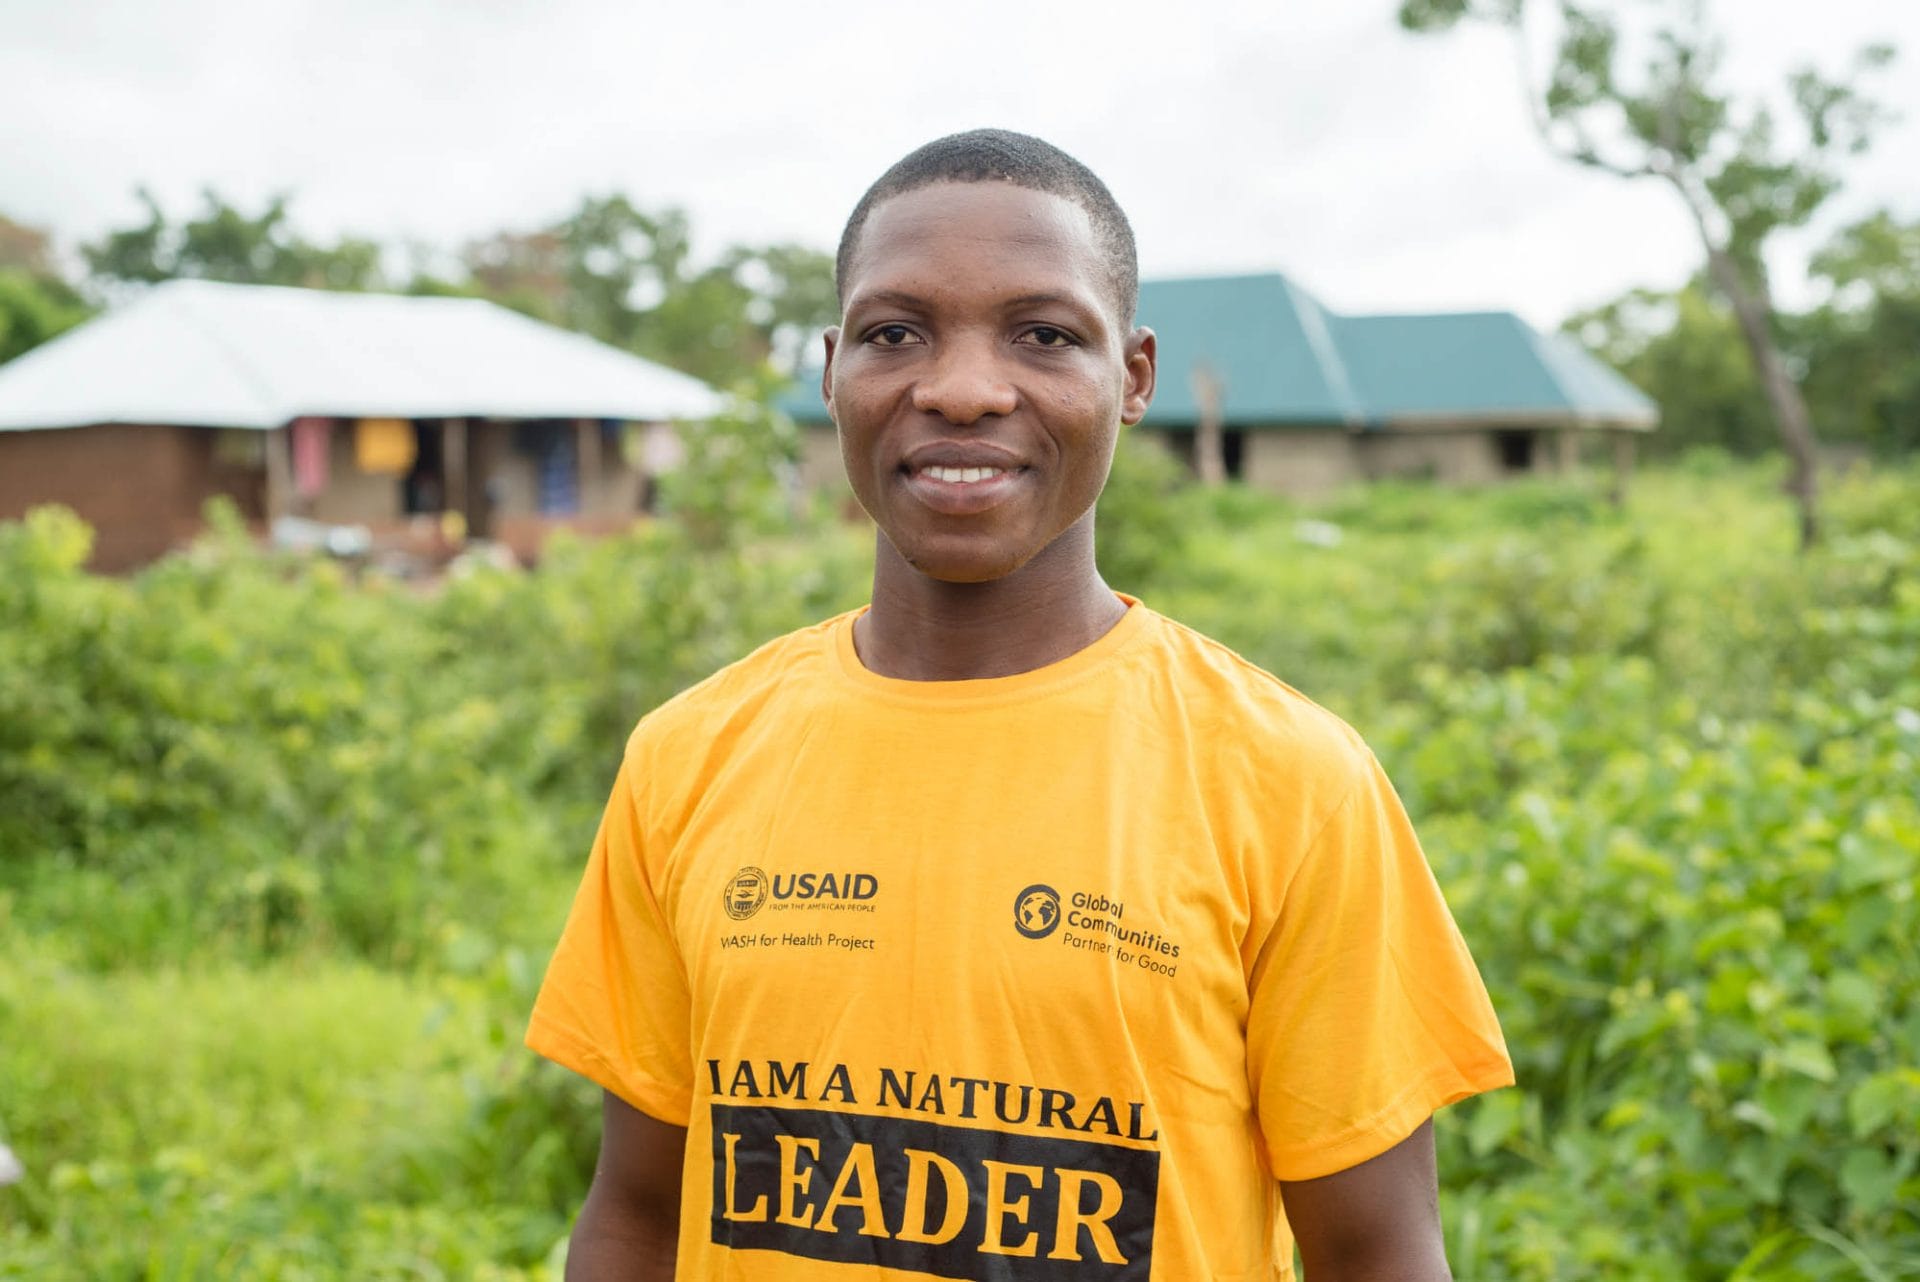 Man standing in front of houses wearing I am a natural leader shirt